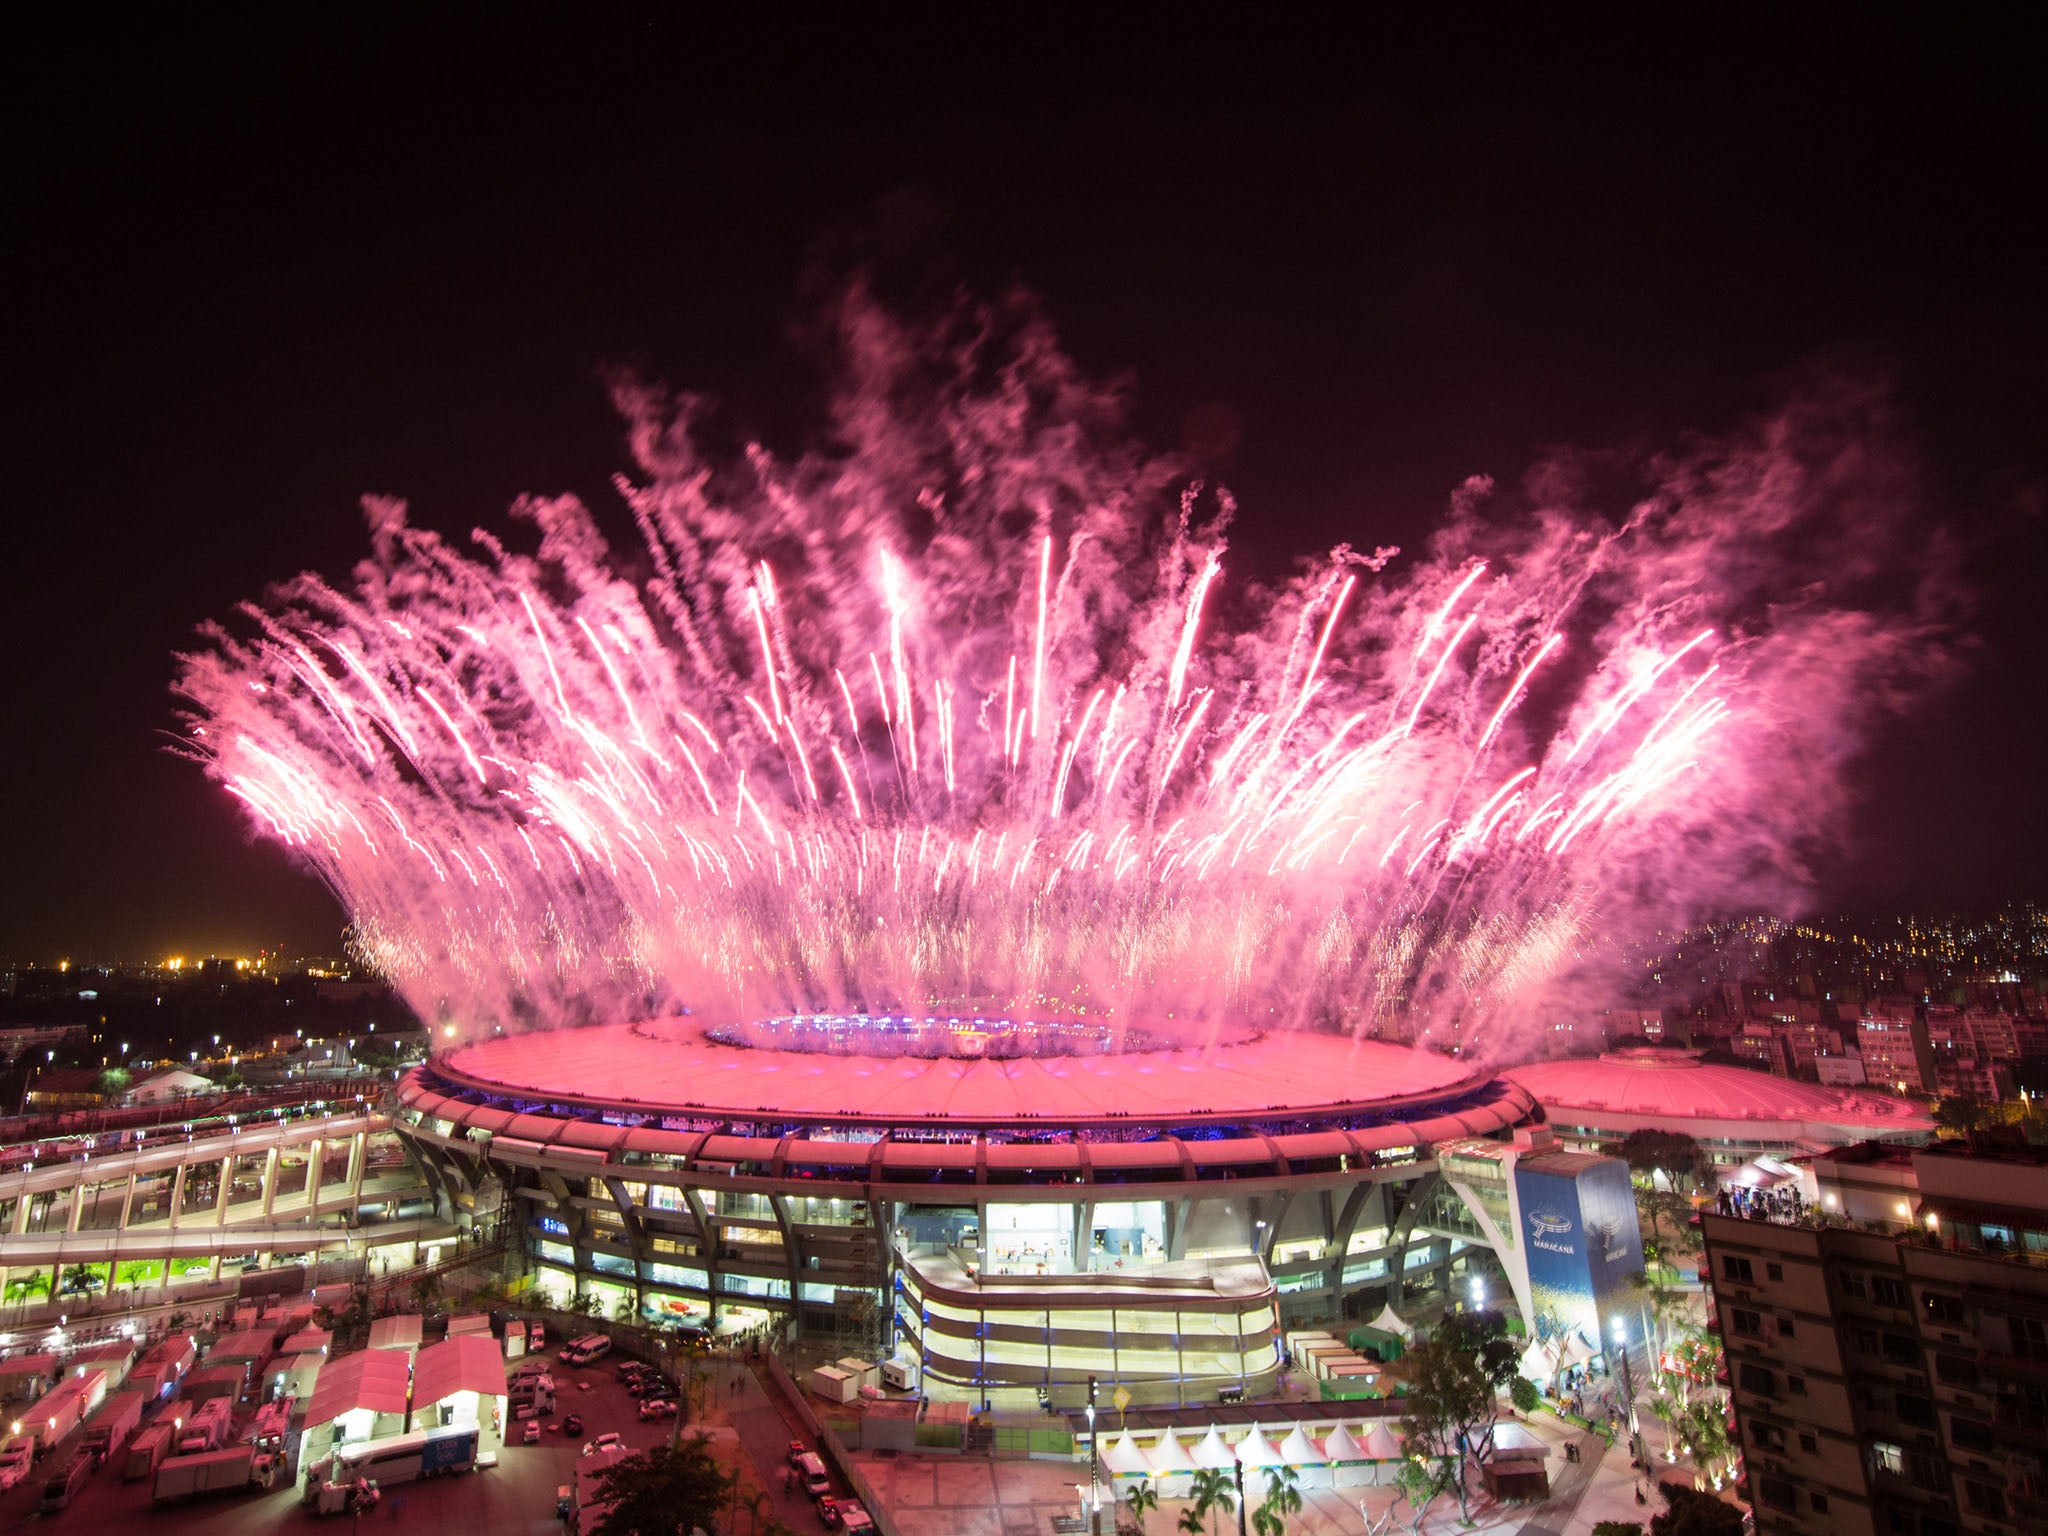 The Rio games opened on Friday night